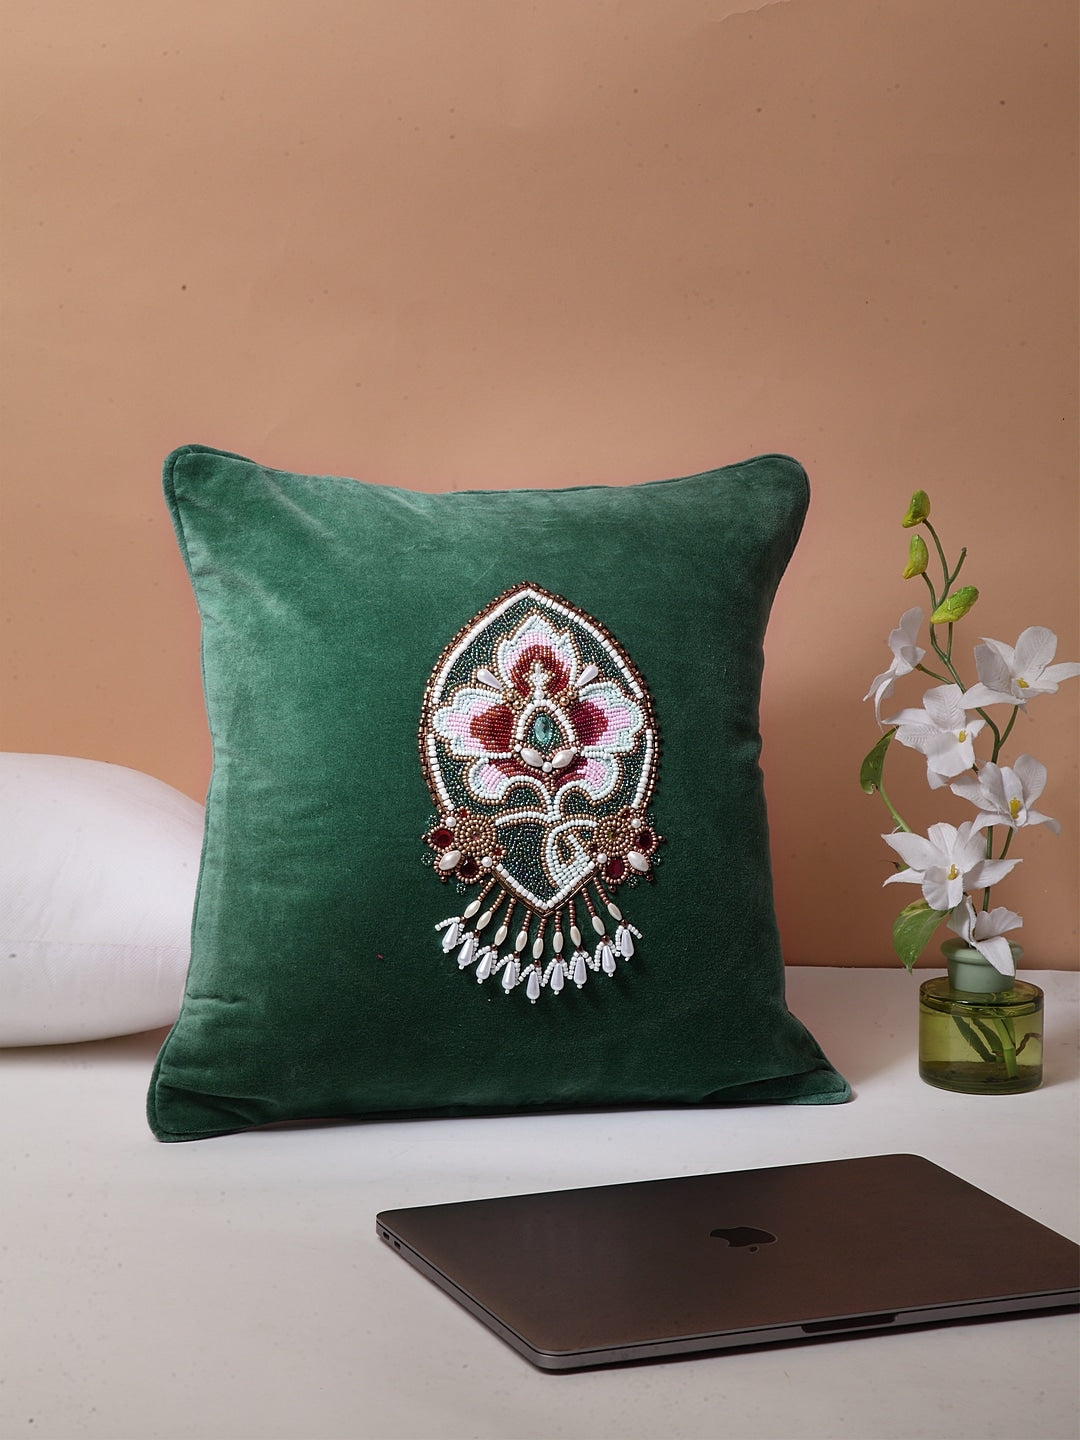 Blanc9 Chandelier Embroidered Cushion Cover